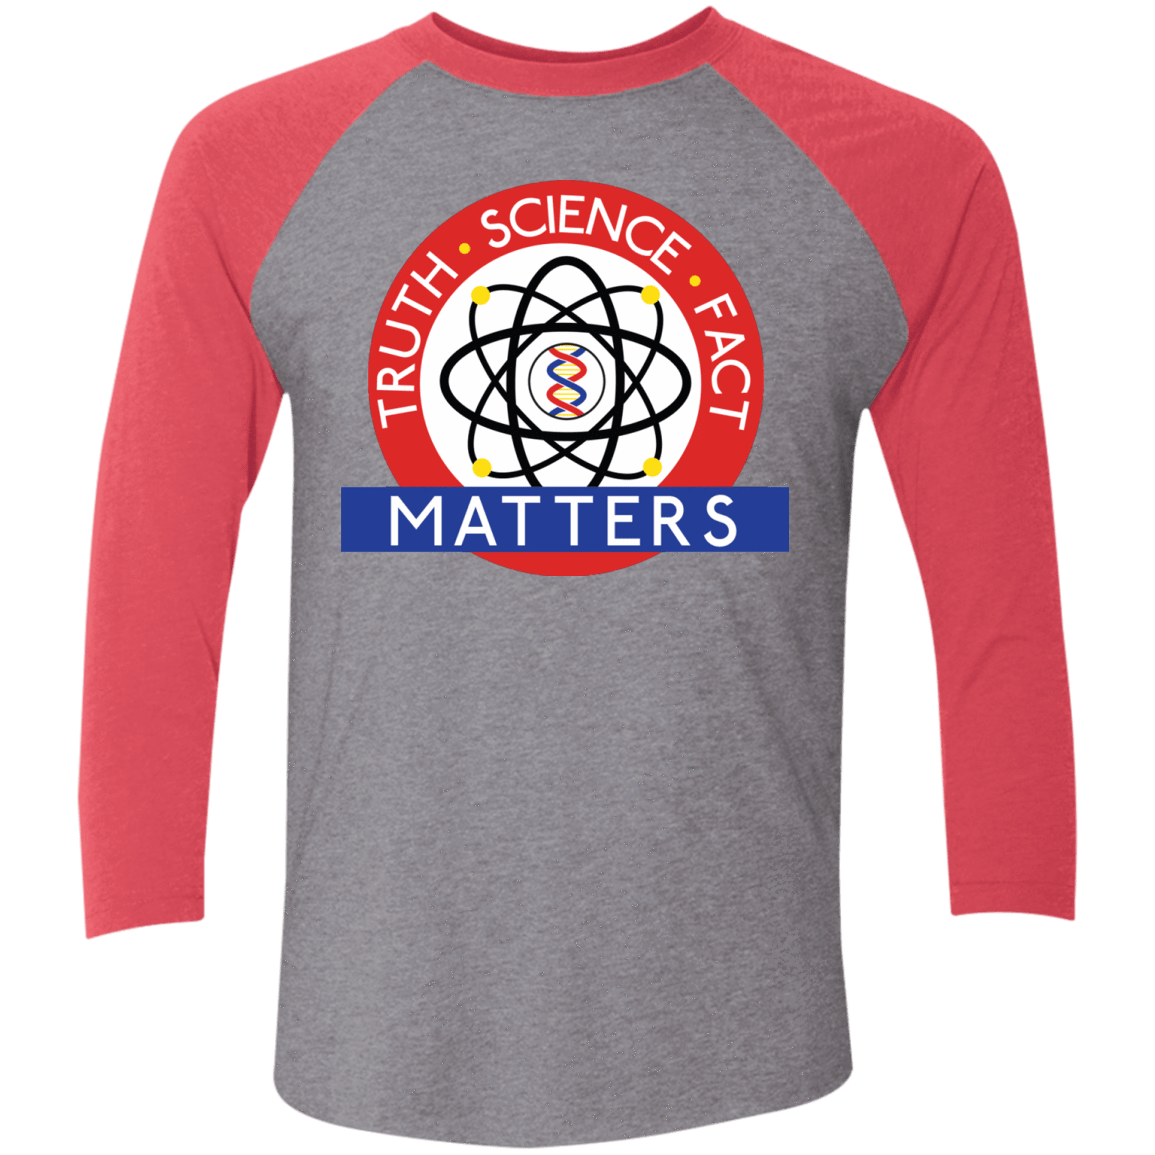 T-Shirts Premium Heather/Vintage Red / X-Small Truth Science Fact Men's Triblend 3/4 Sleeve